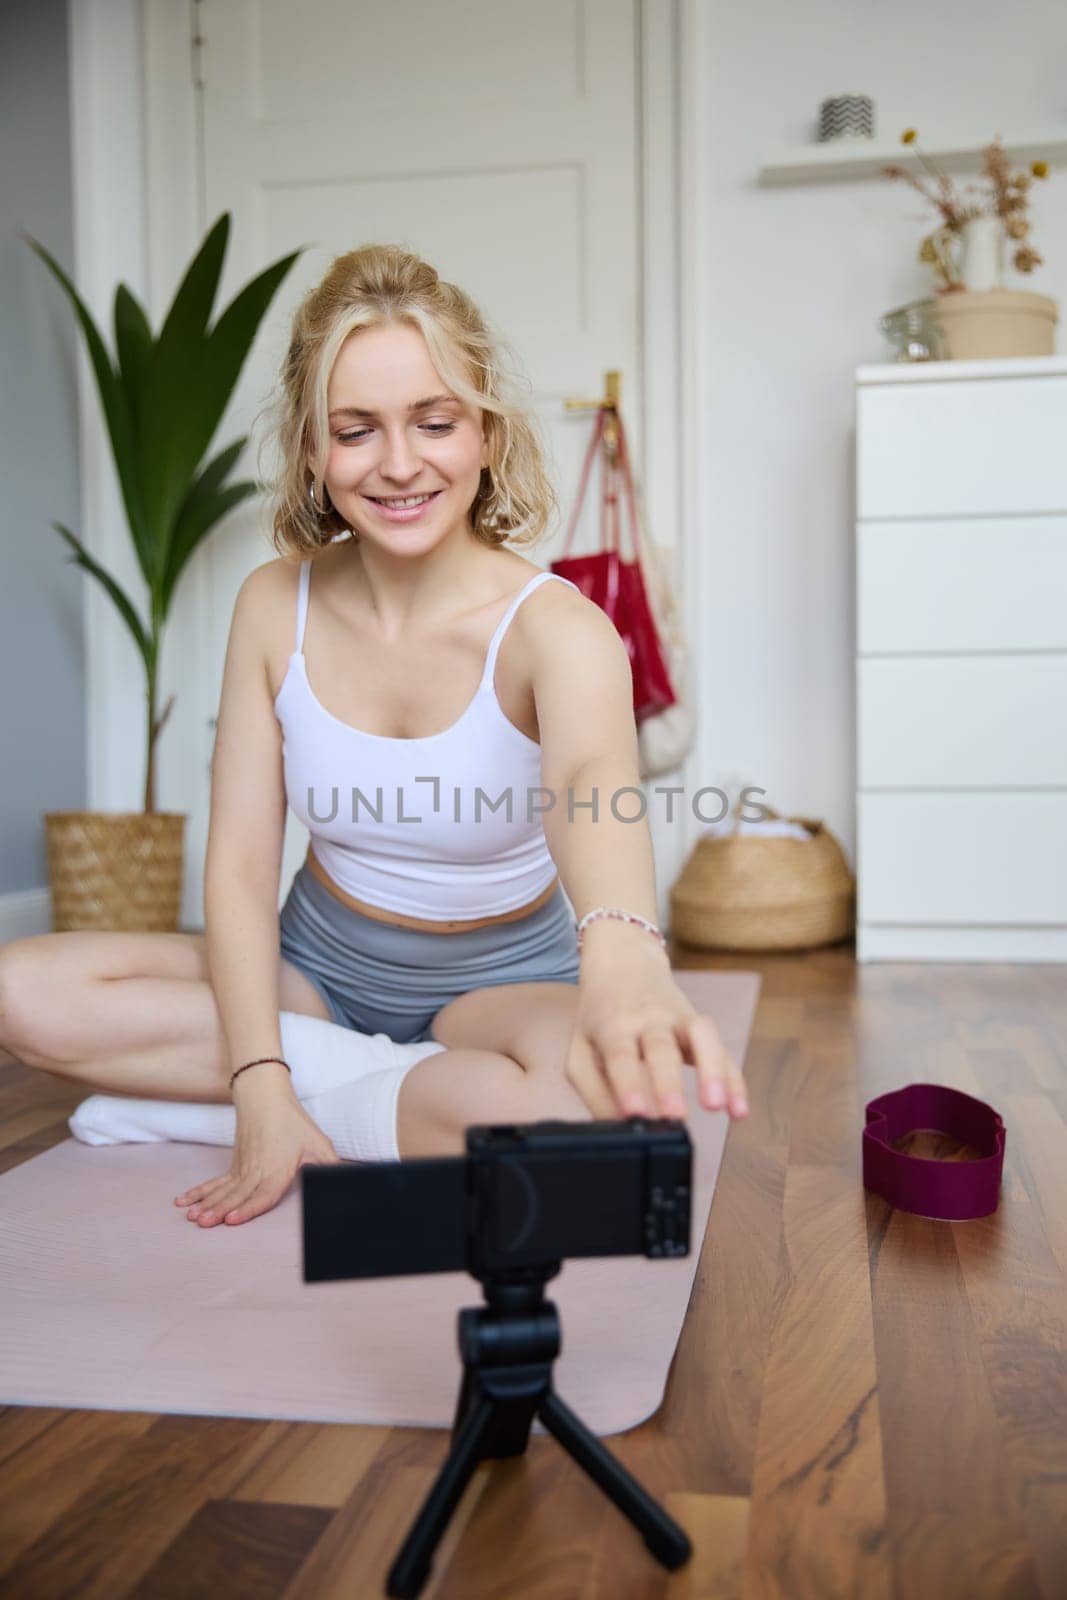 Vertical shot of woman recording her workout on digital camera, making a video about yoga and fitness at home, sitting on rubber mat in activewear.